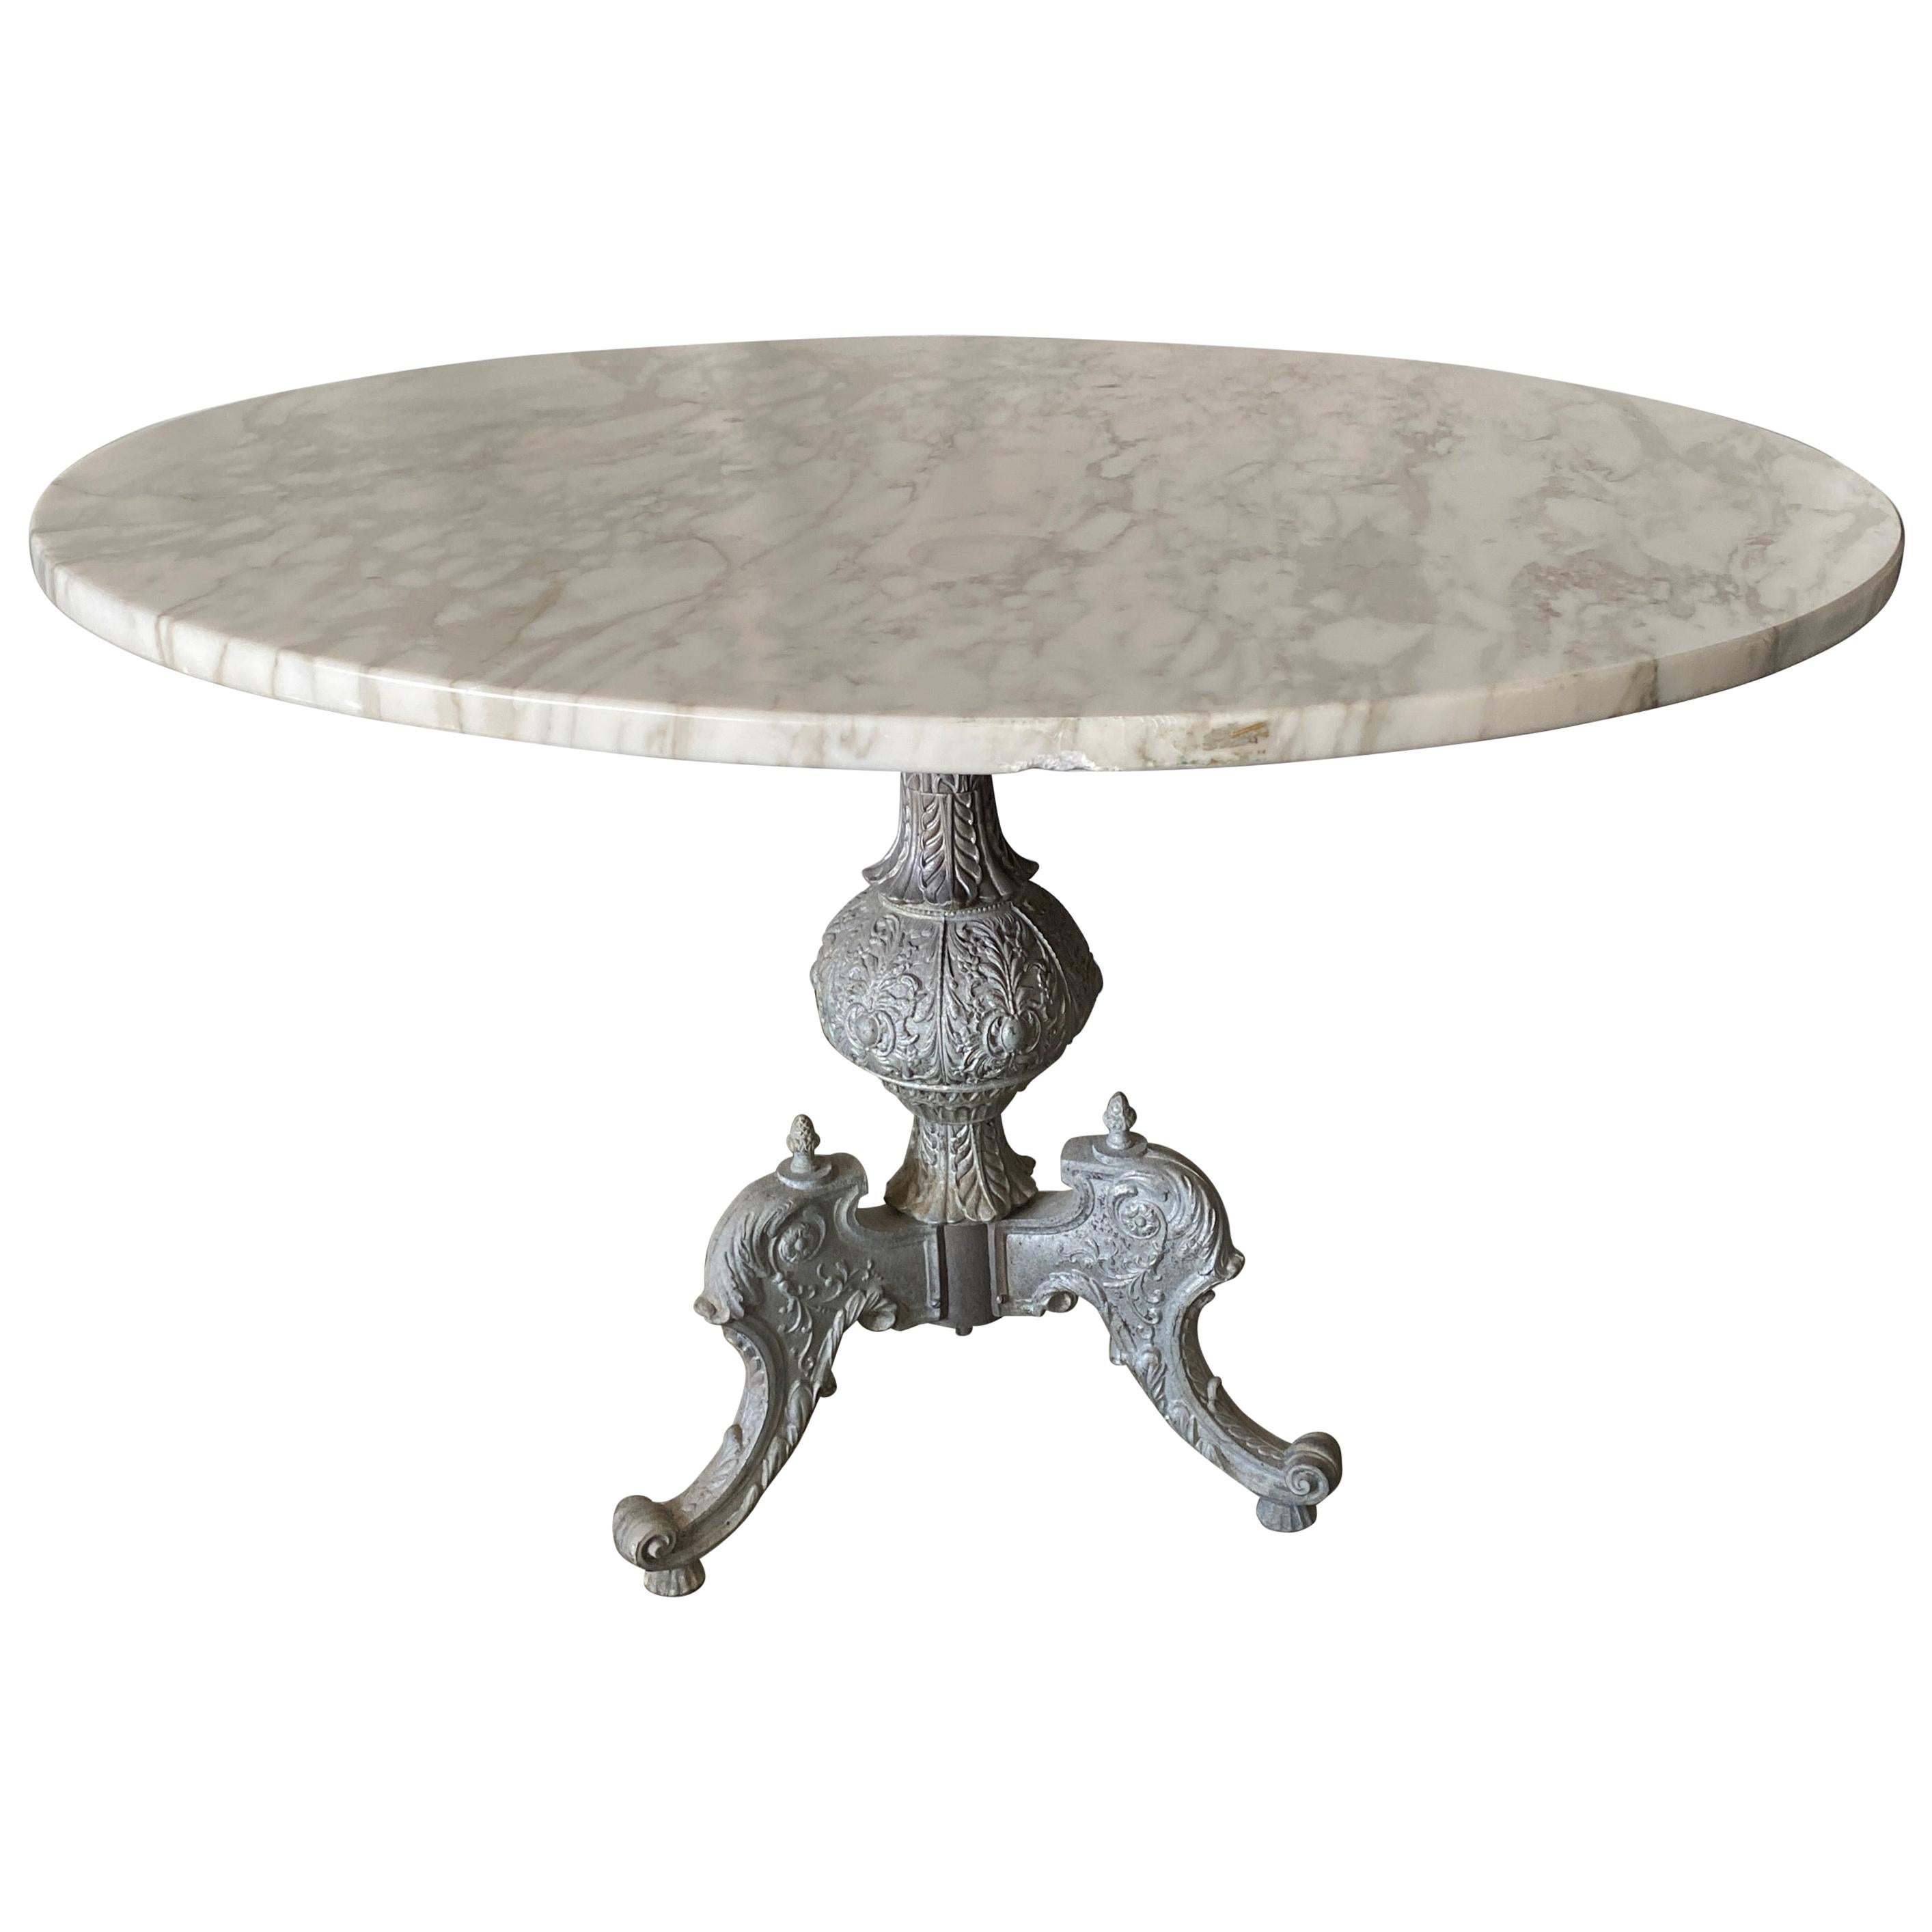 Italian Baroque Style Gilt Metal Pedestal Round Marble-Top Table For Sale